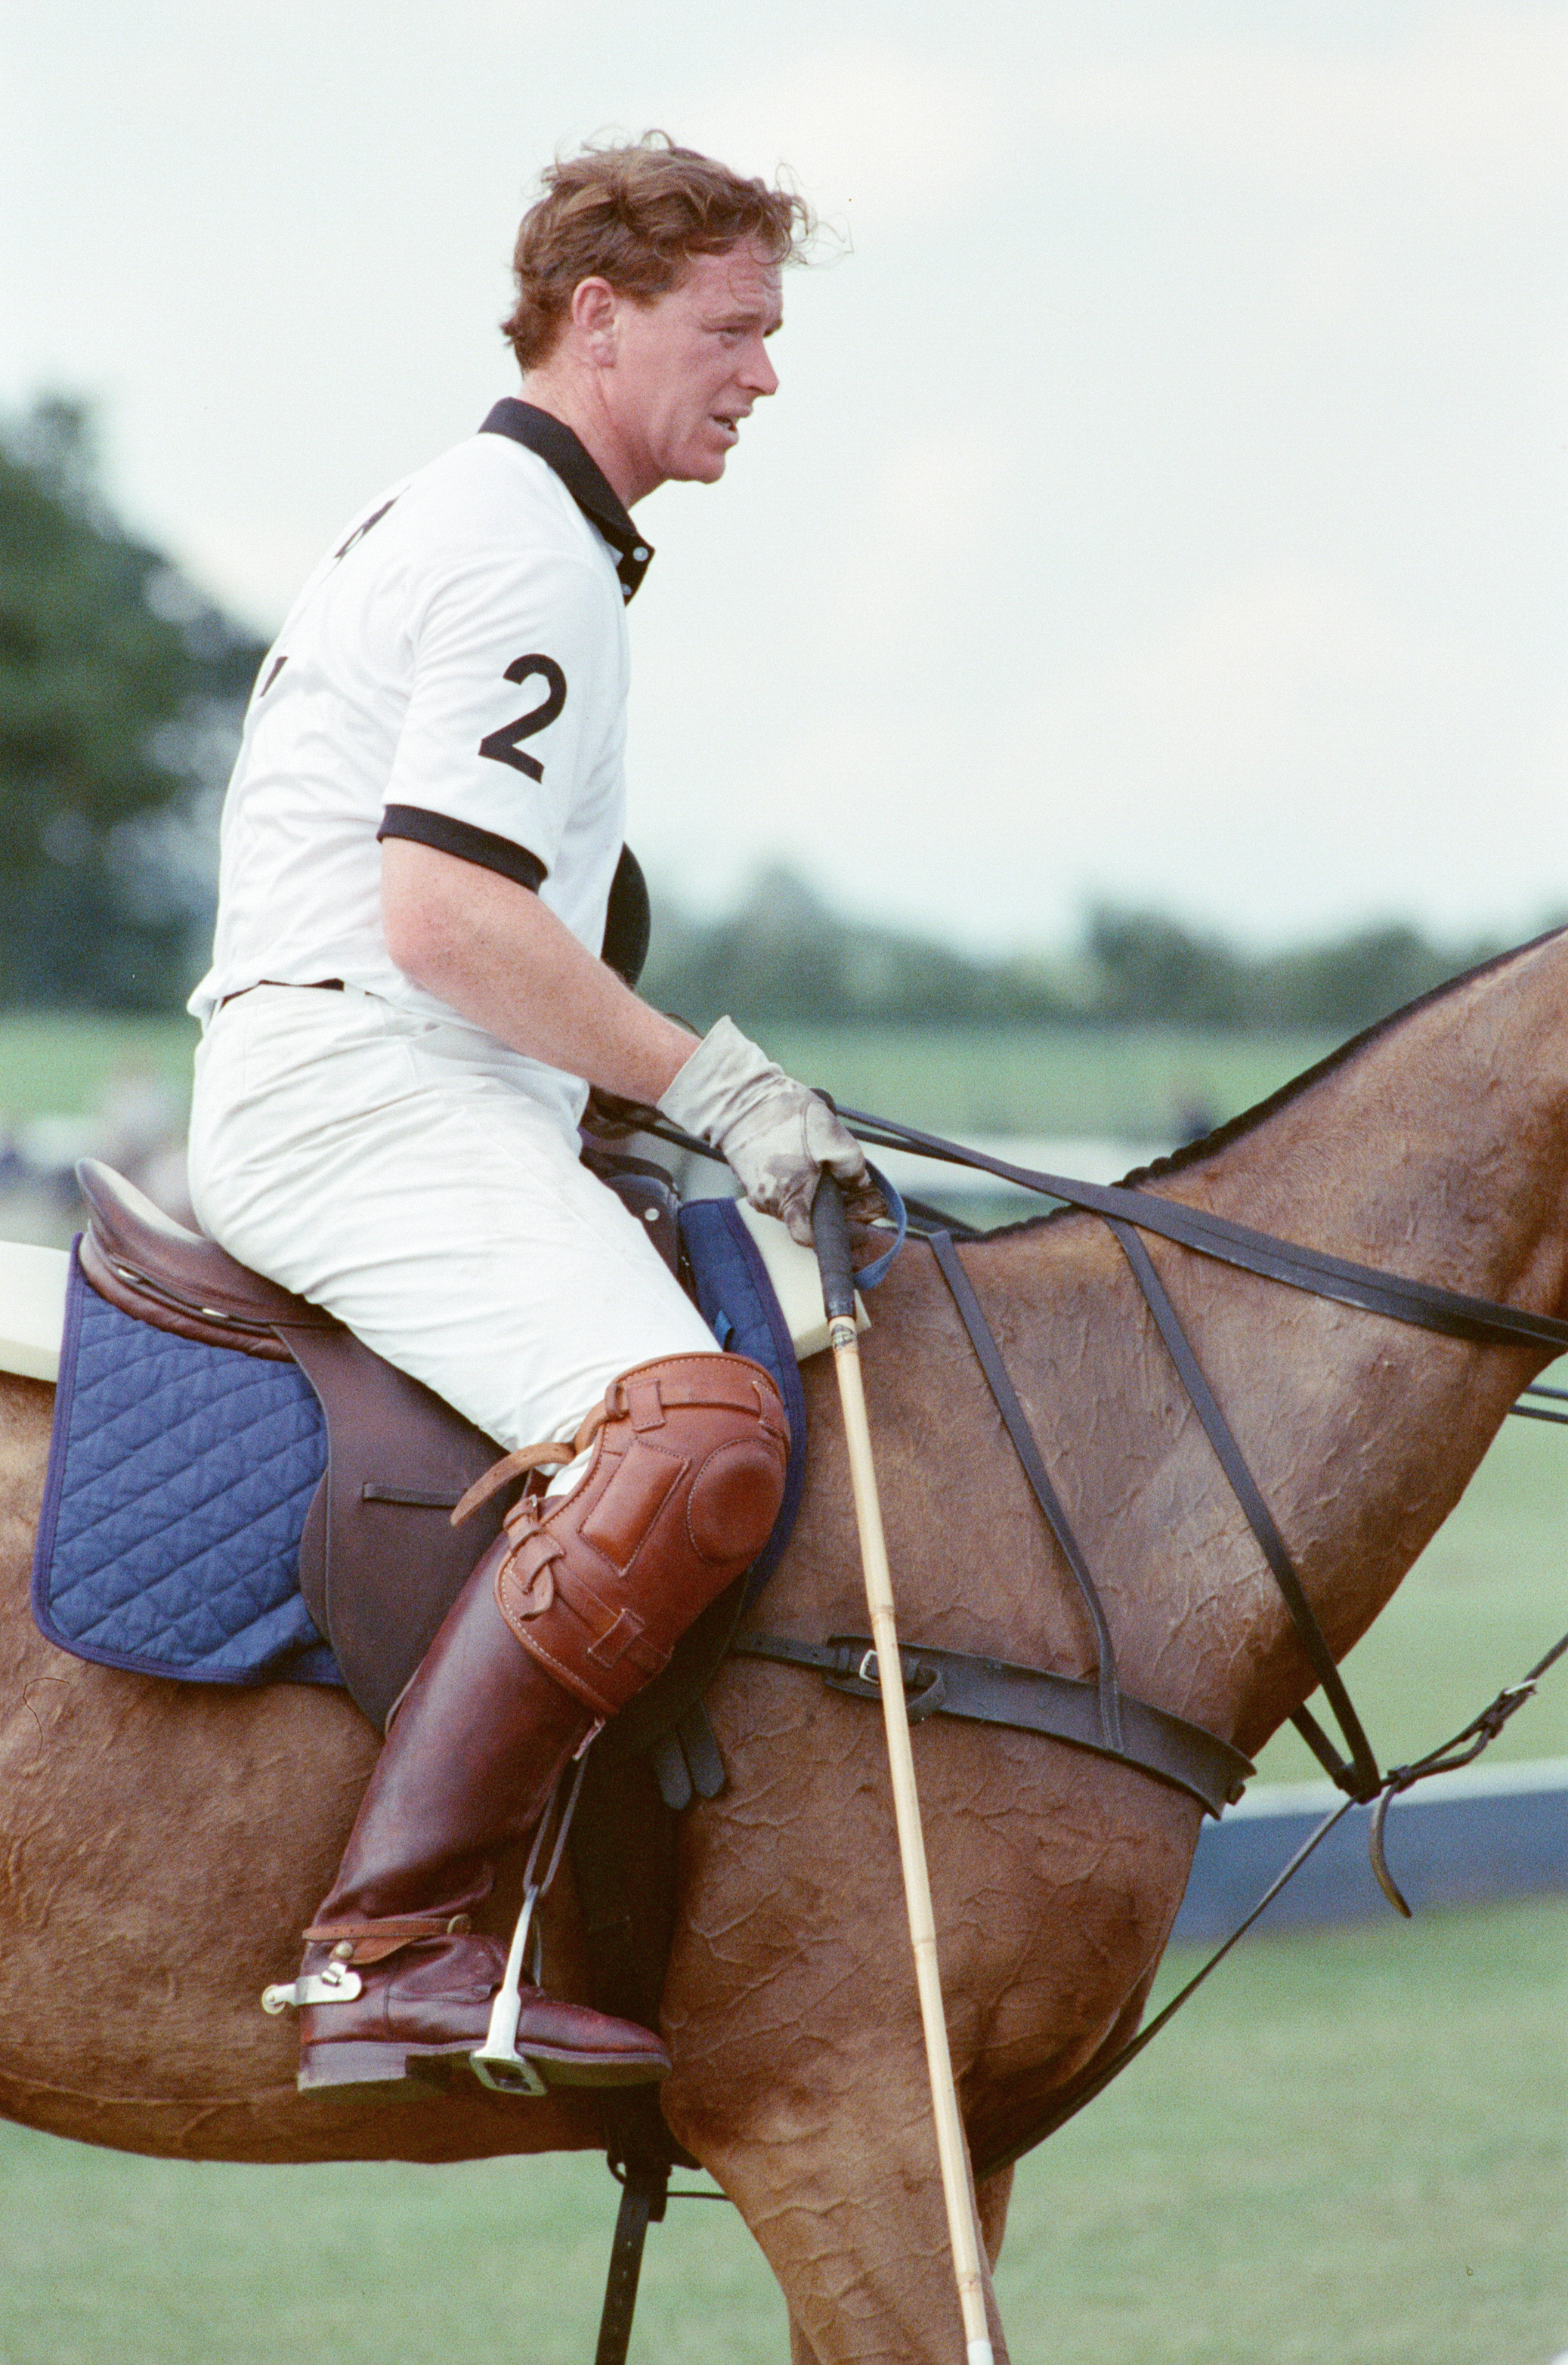 Major James Hewitt on the polo field, on July 16, 1991. | Source: Getty Images